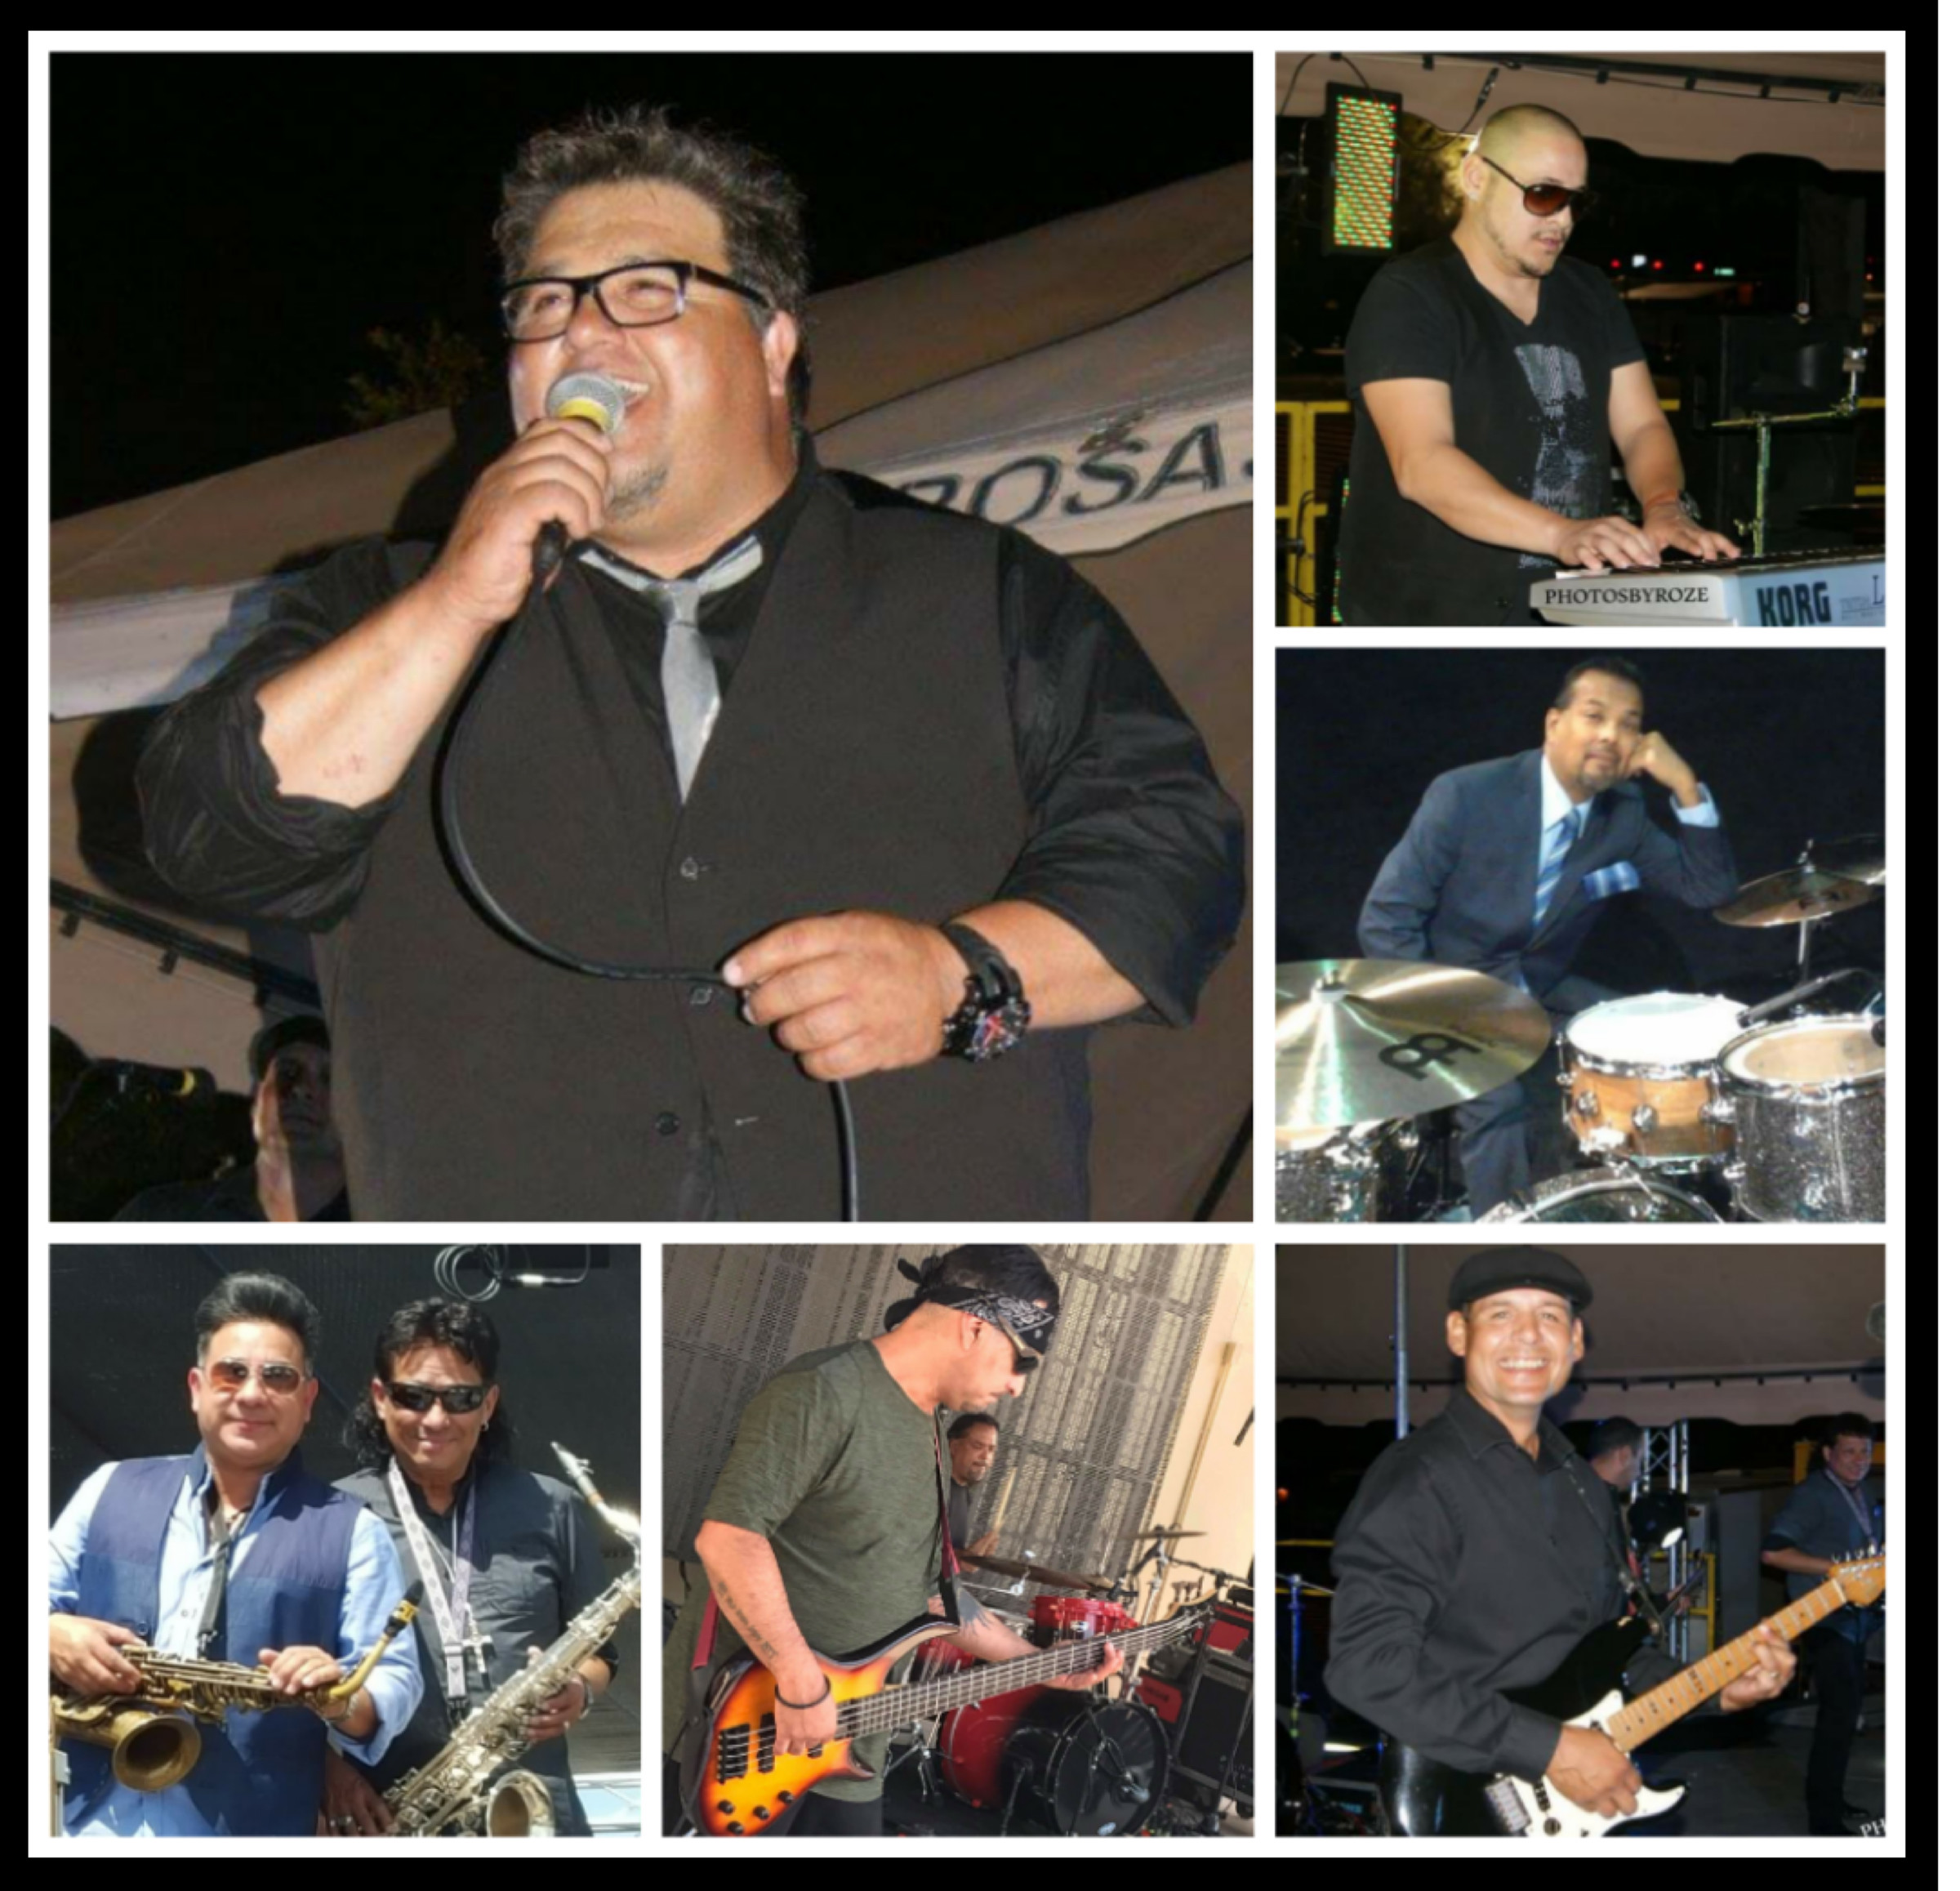 The Magnifico 7, comprised of members LeeRoy Camarillo, Ignacio Puente, Jesse Perales, Rick Patino, Inocensio Sepulveda, Jesse Mejia and Adam Mosqueda, are up for the “New Group of the Year” award for the Tejano Music Awards.